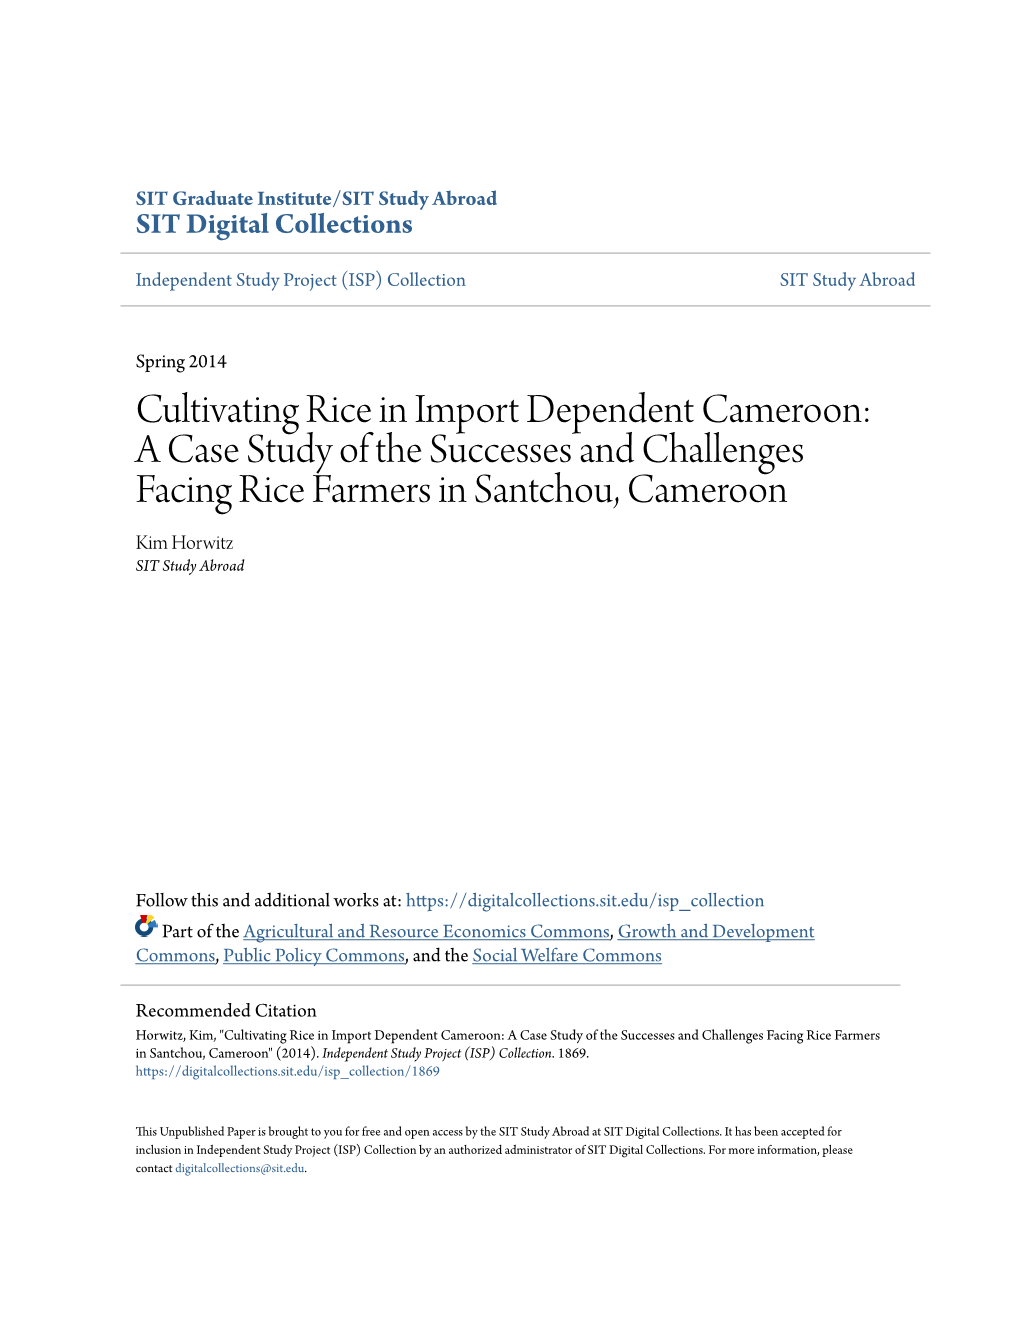 Cultivating Rice in Import Dependent Cameroon: a Case Study of the Successes and Challenges Facing Rice Farmers in Santchou, Cameroon Kim Horwitz SIT Study Abroad